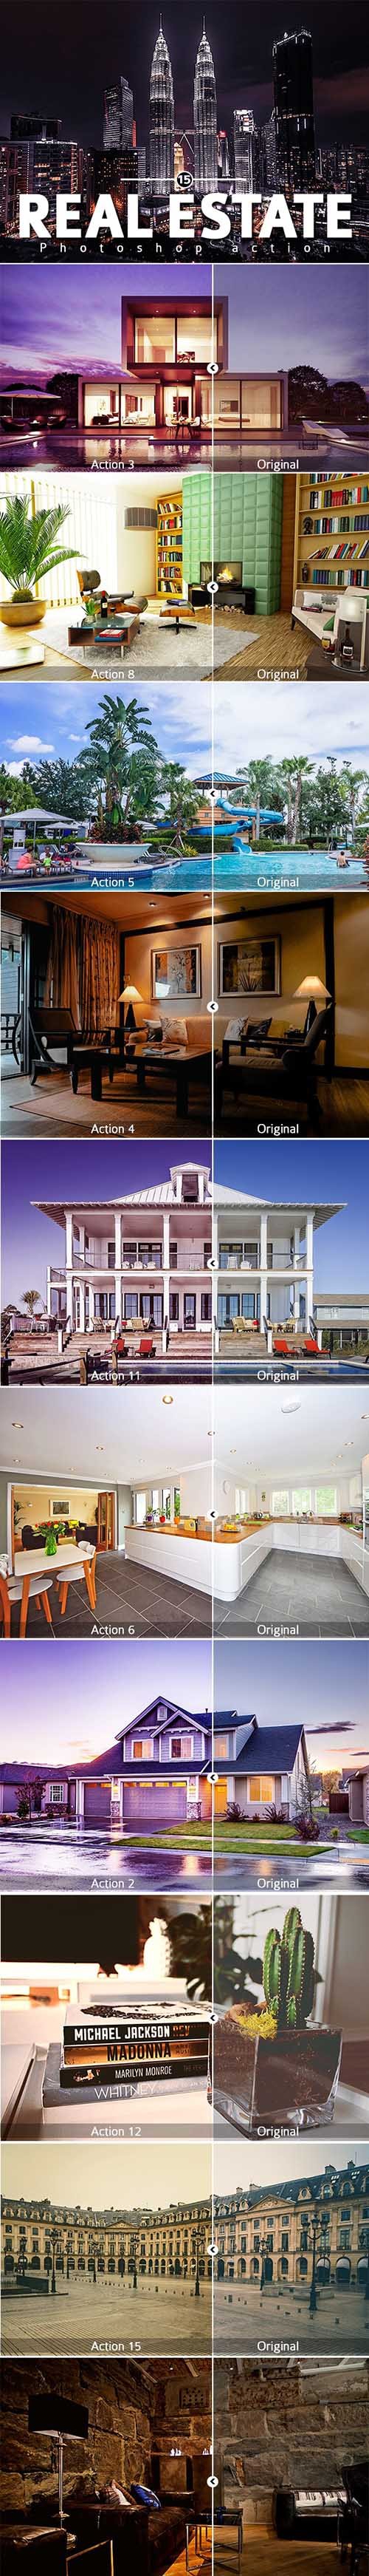 Real Estate Photoshop Action 24859571